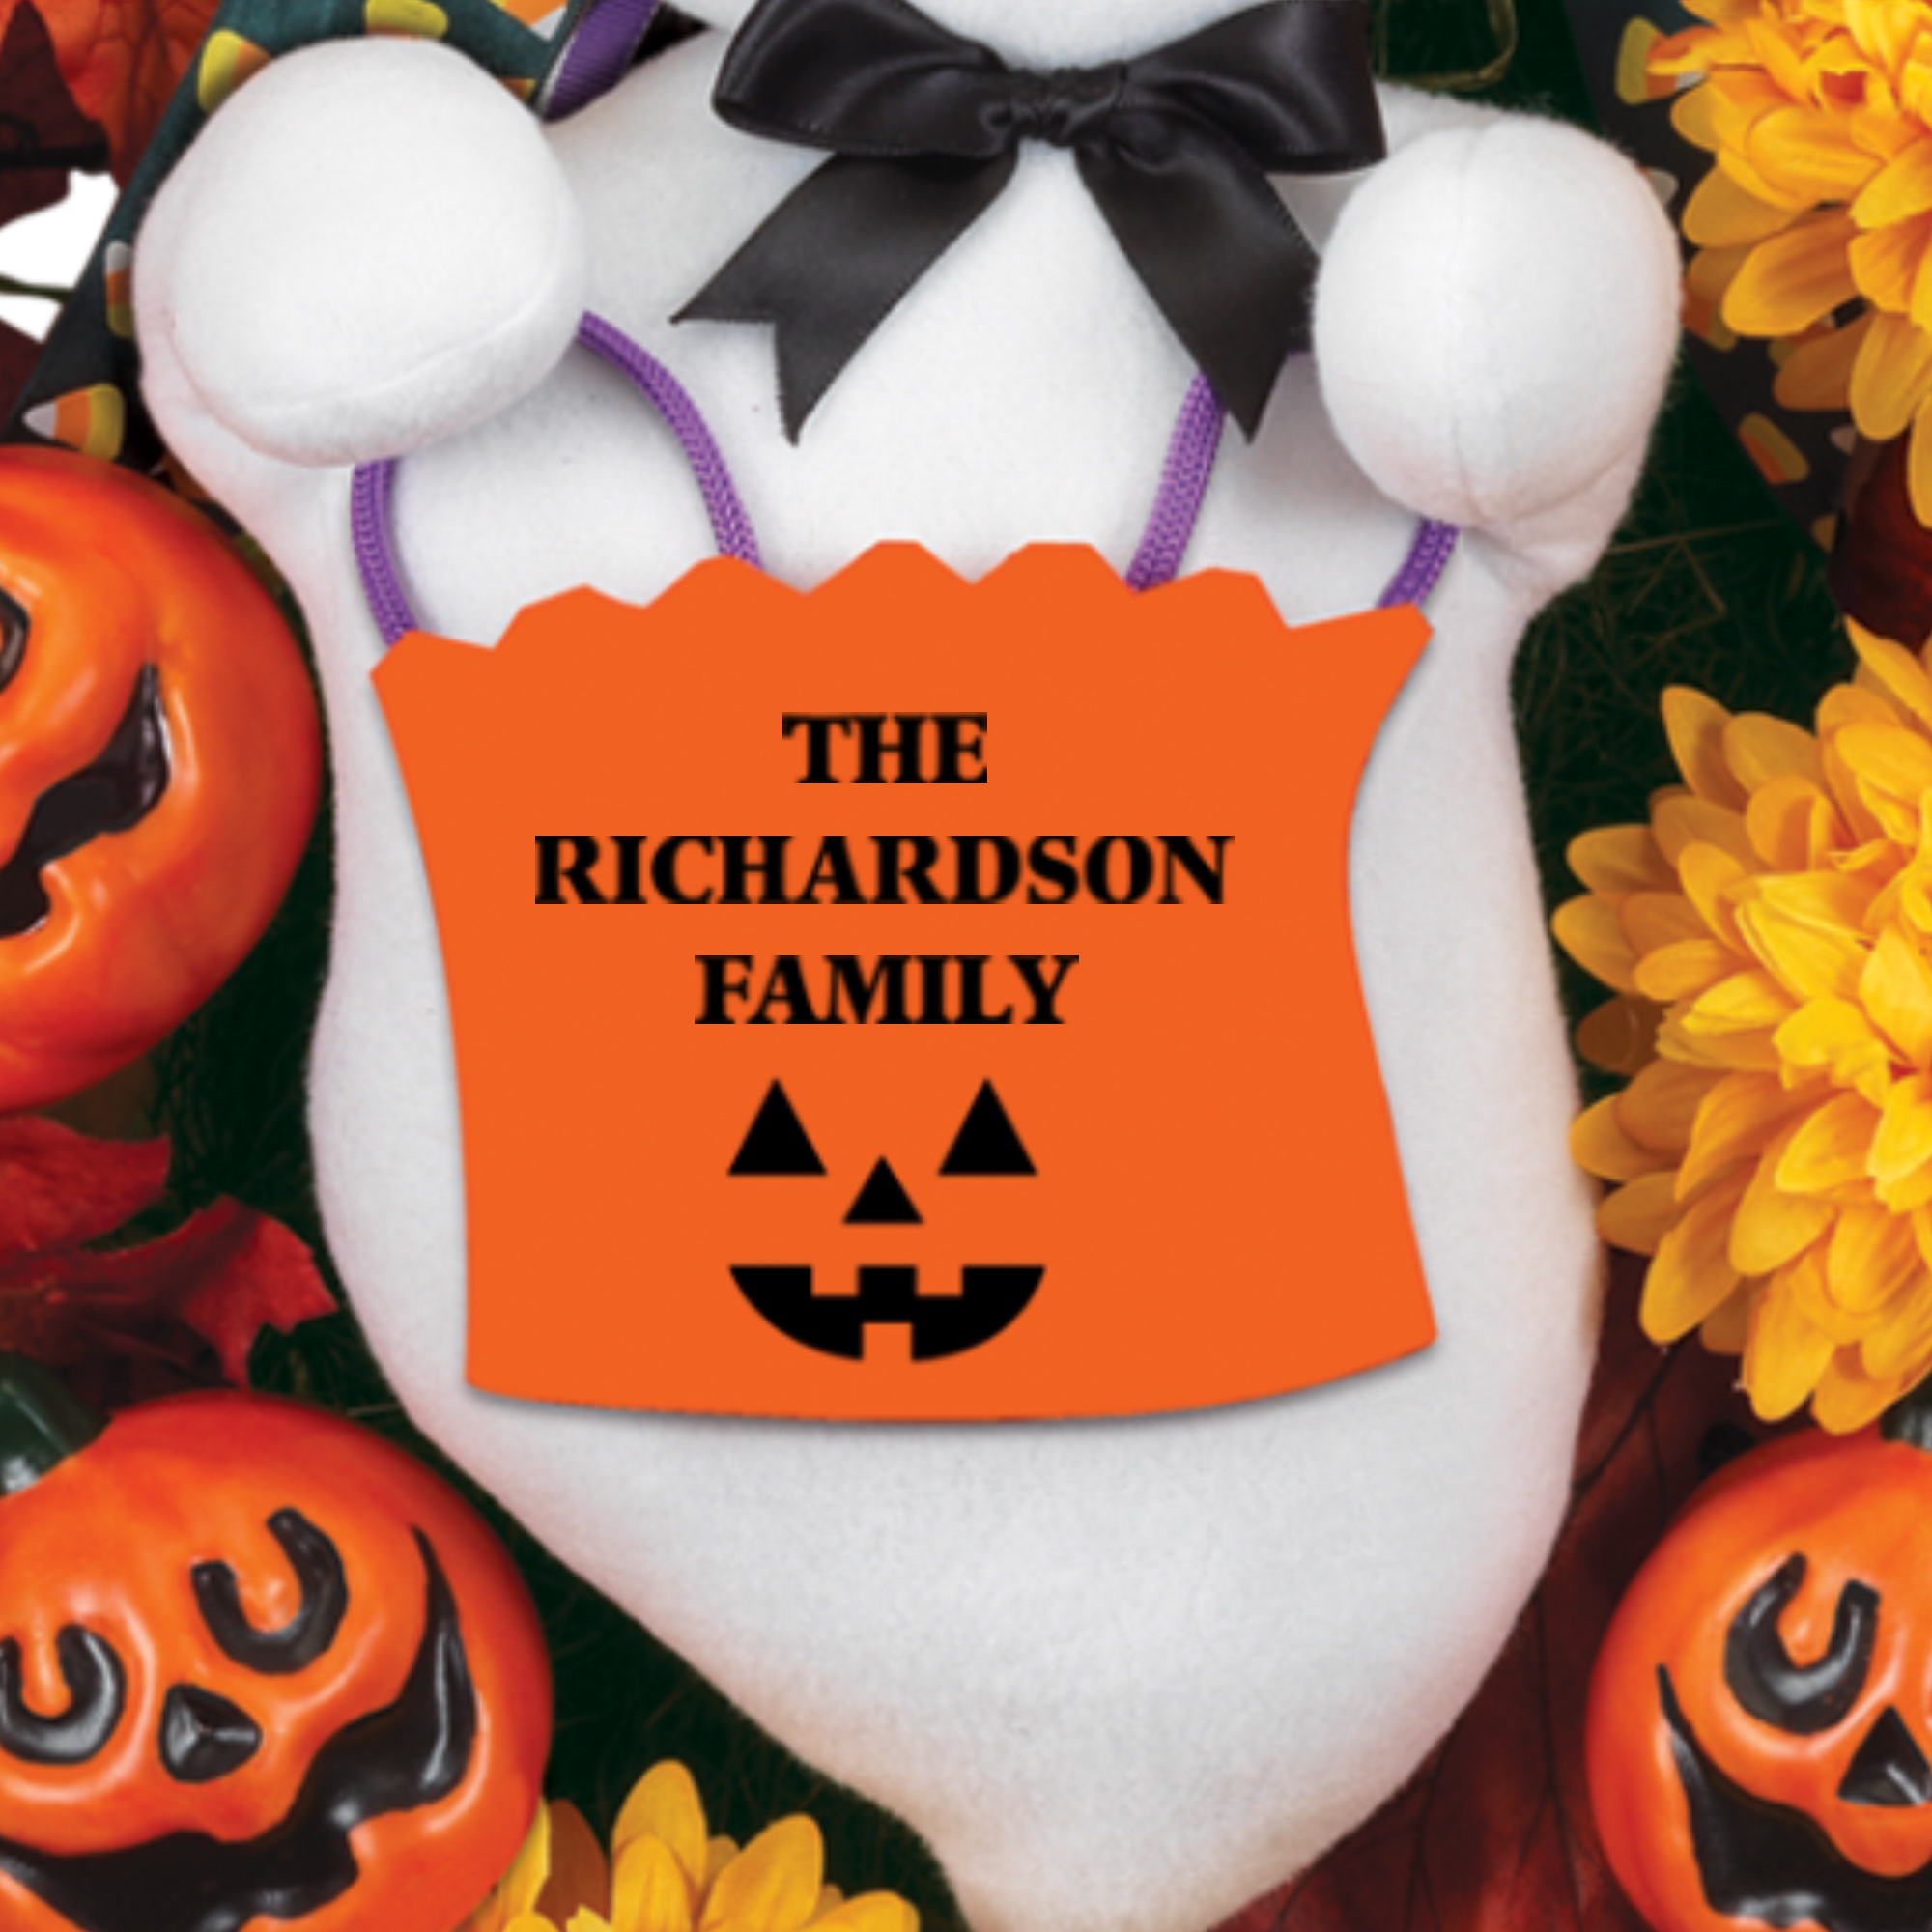 The Personalized Family Halloween Wreath 2379 0041 a main